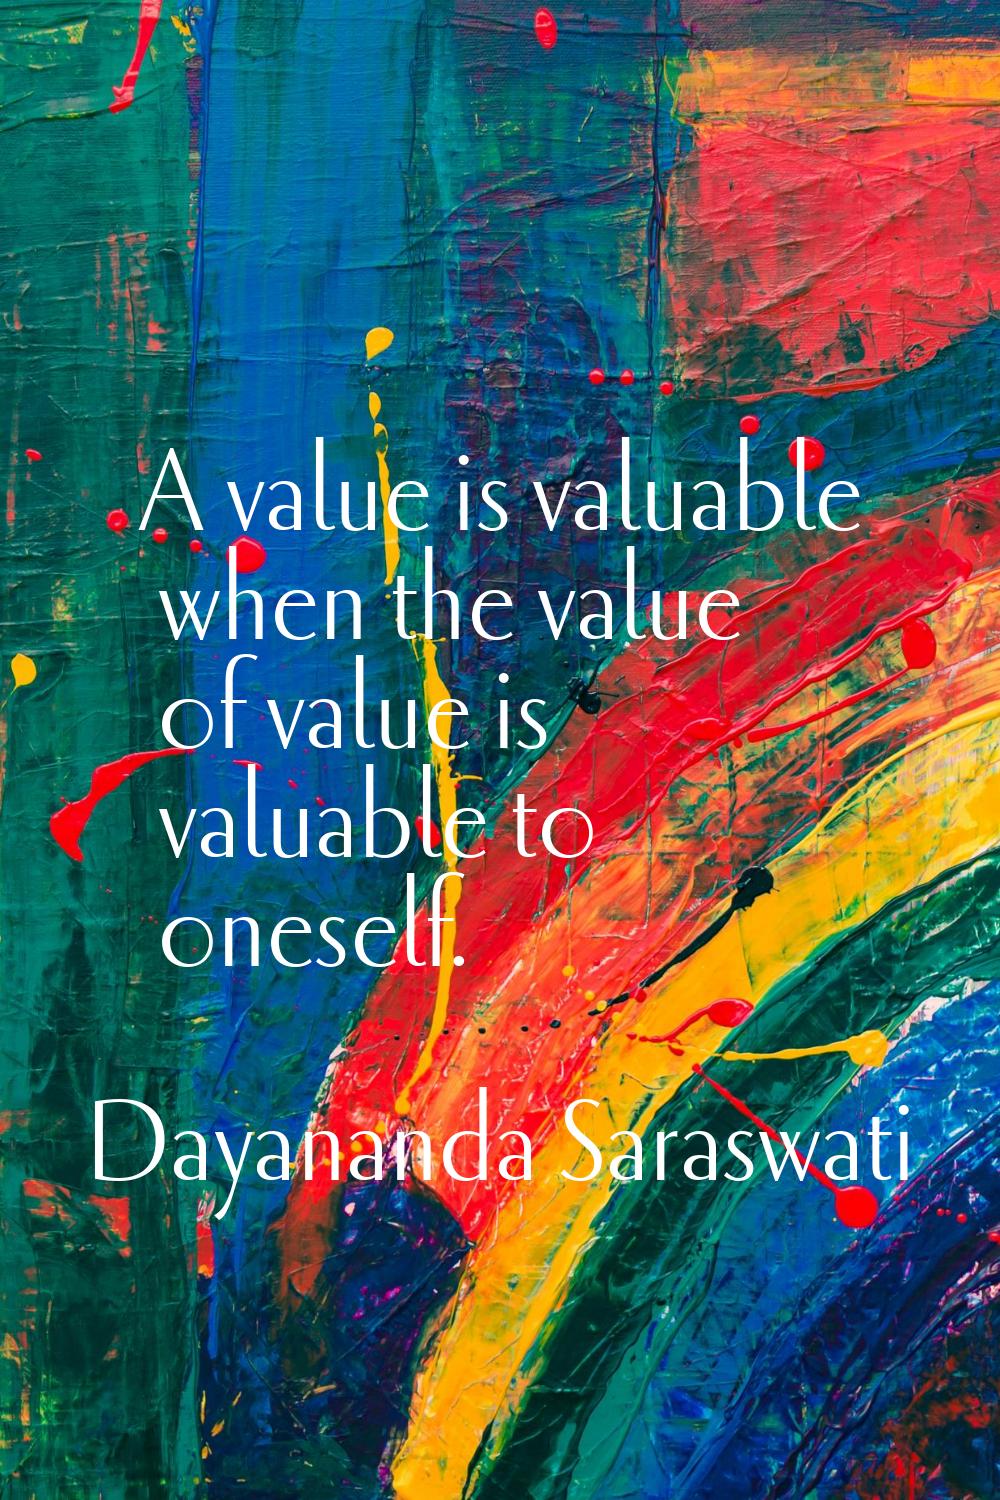 A value is valuable when the value of value is valuable to oneself.